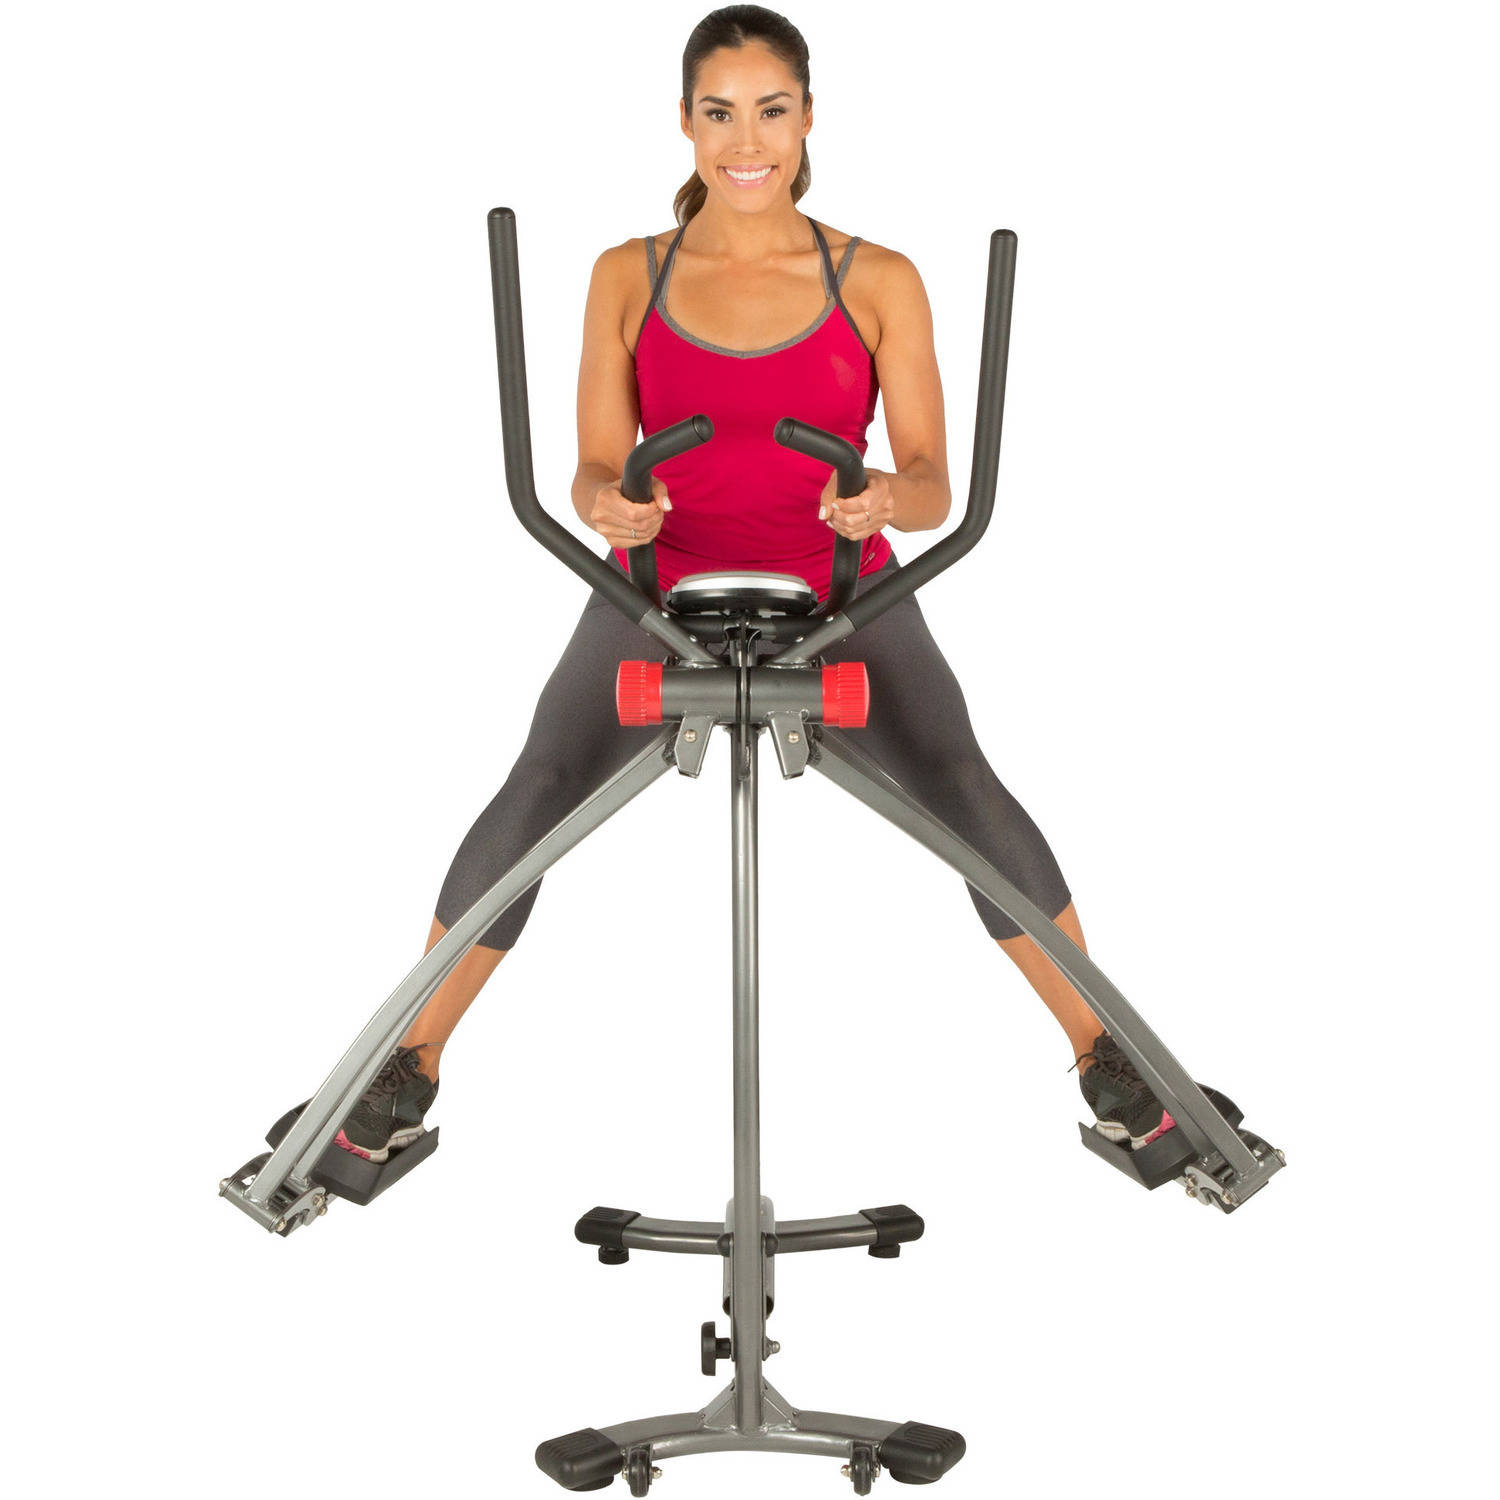 Fitness Reality Multi-Direction Elliptical Cloud Walker X1 with Pulse Sensors - image 27 of 31